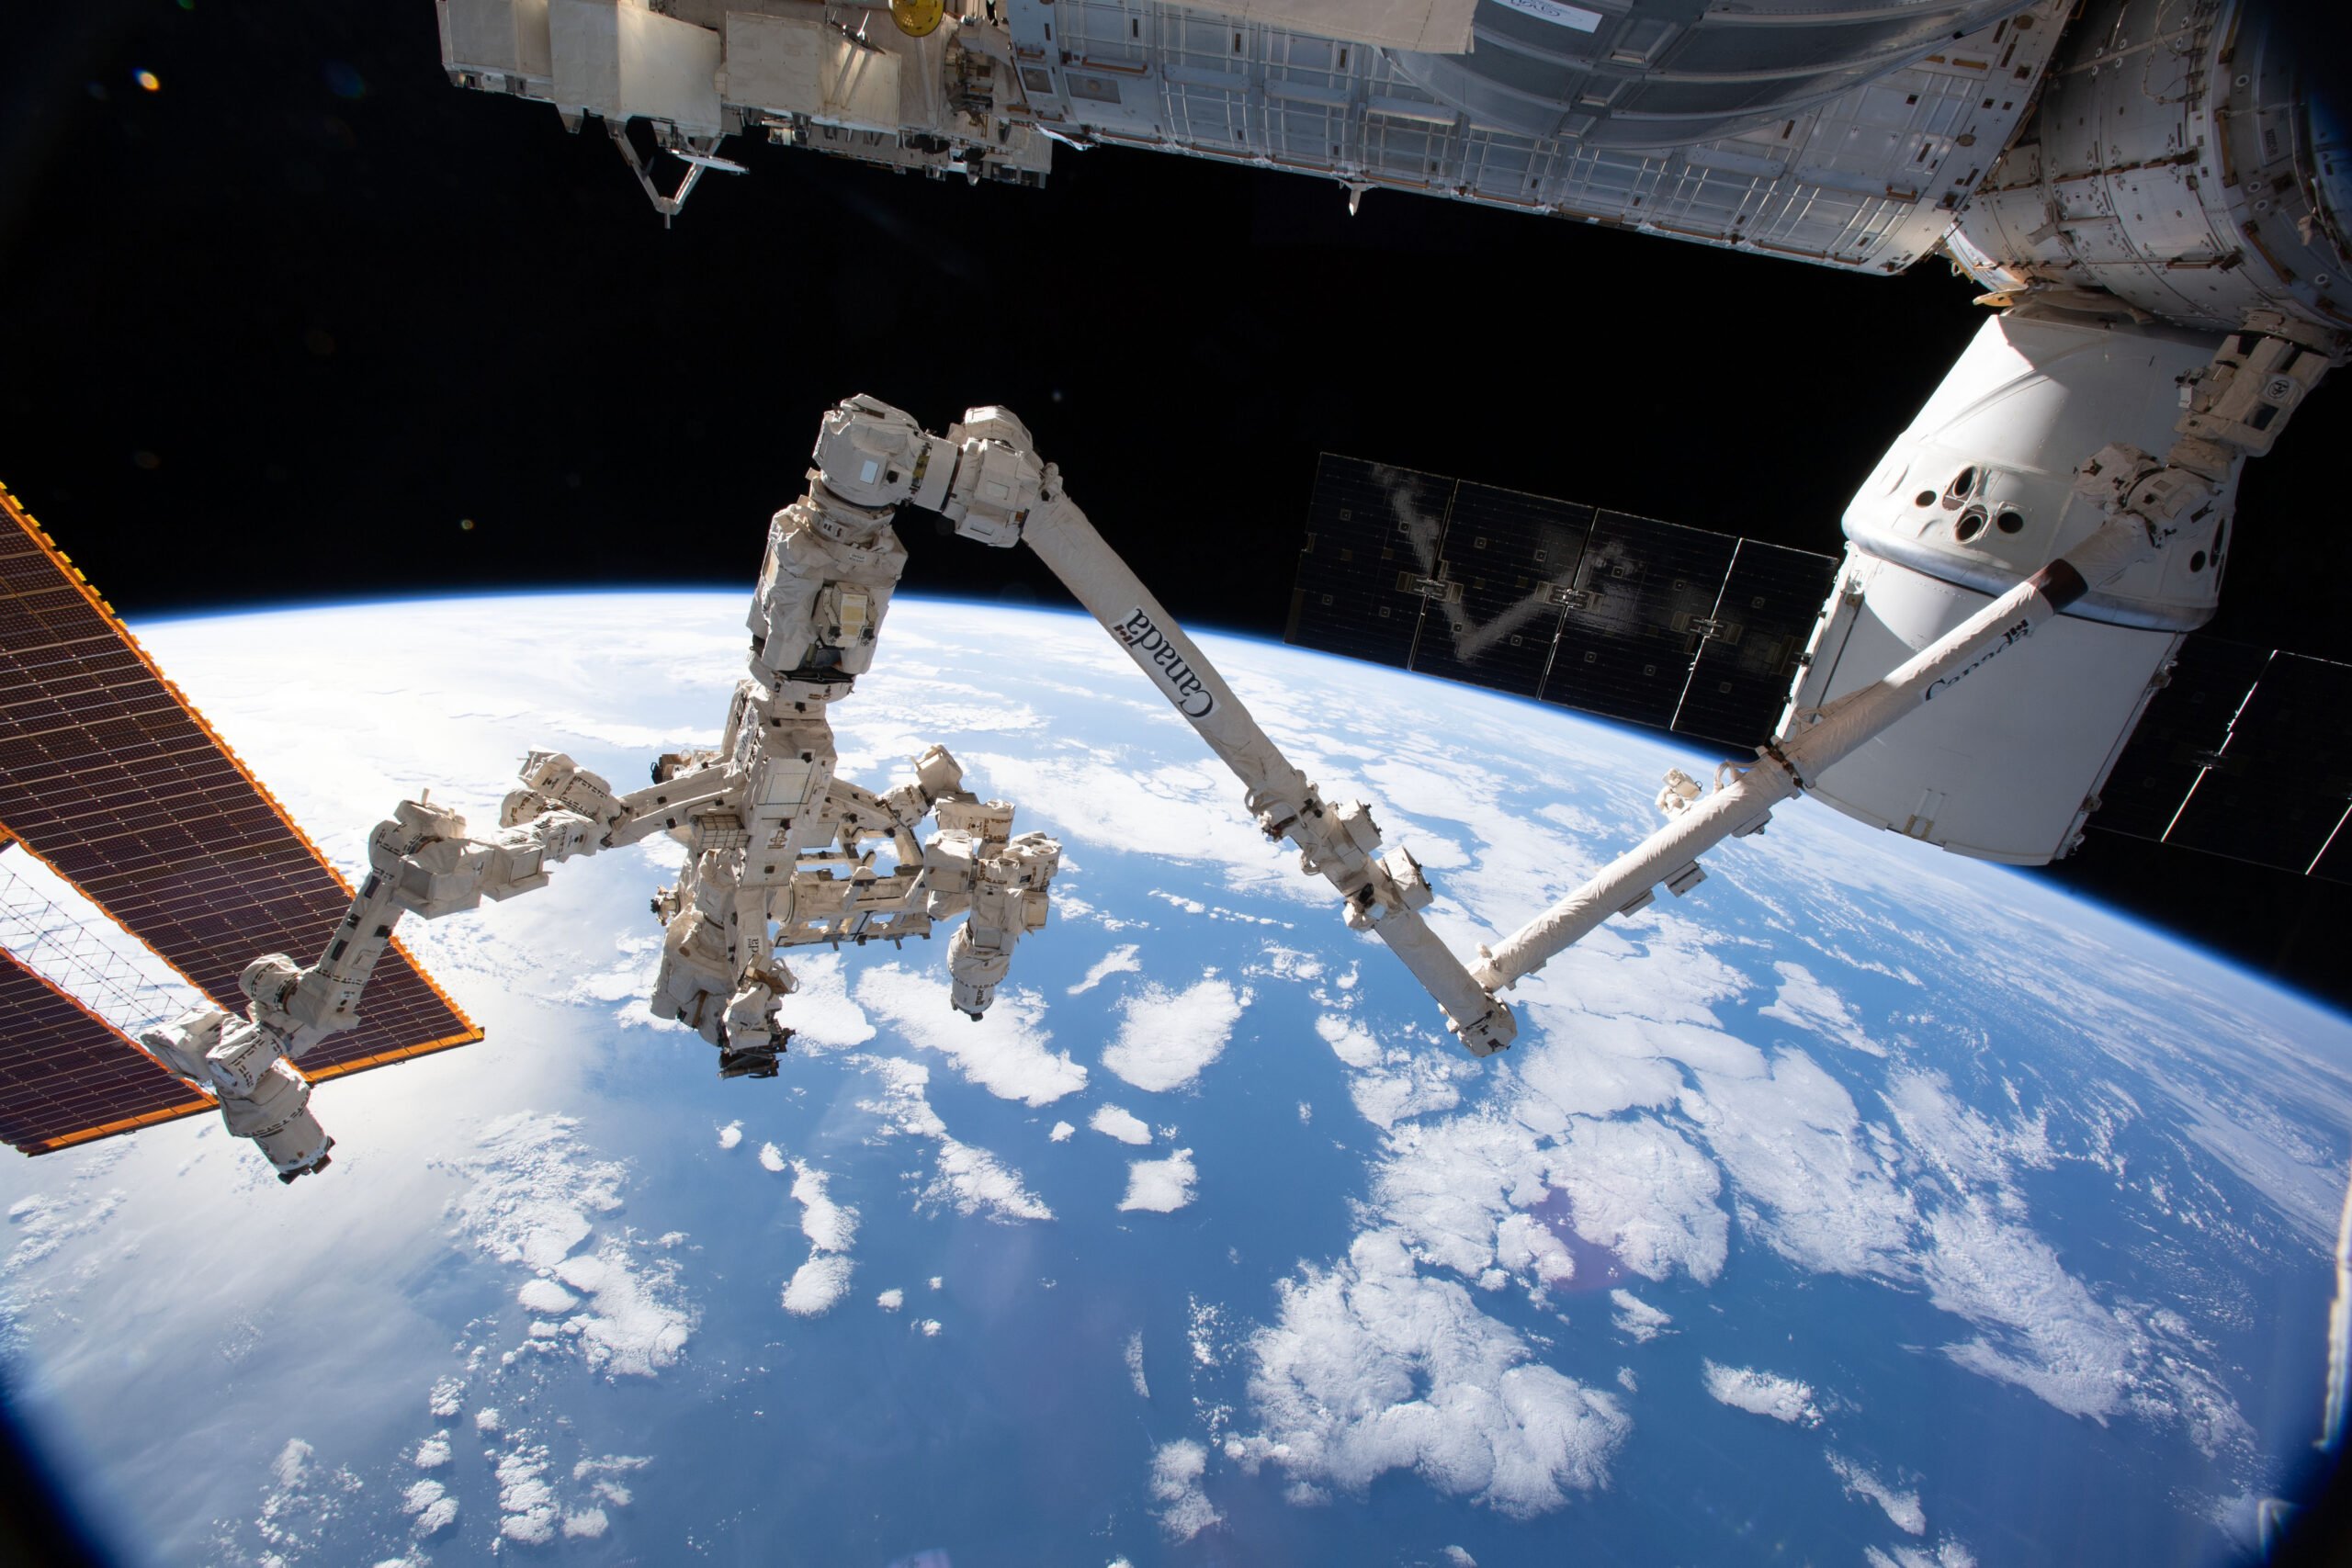 CANADIAN SPACE ROBOTICS SYSTEMS-CANADARM; Image Credit: spacefoundation.org